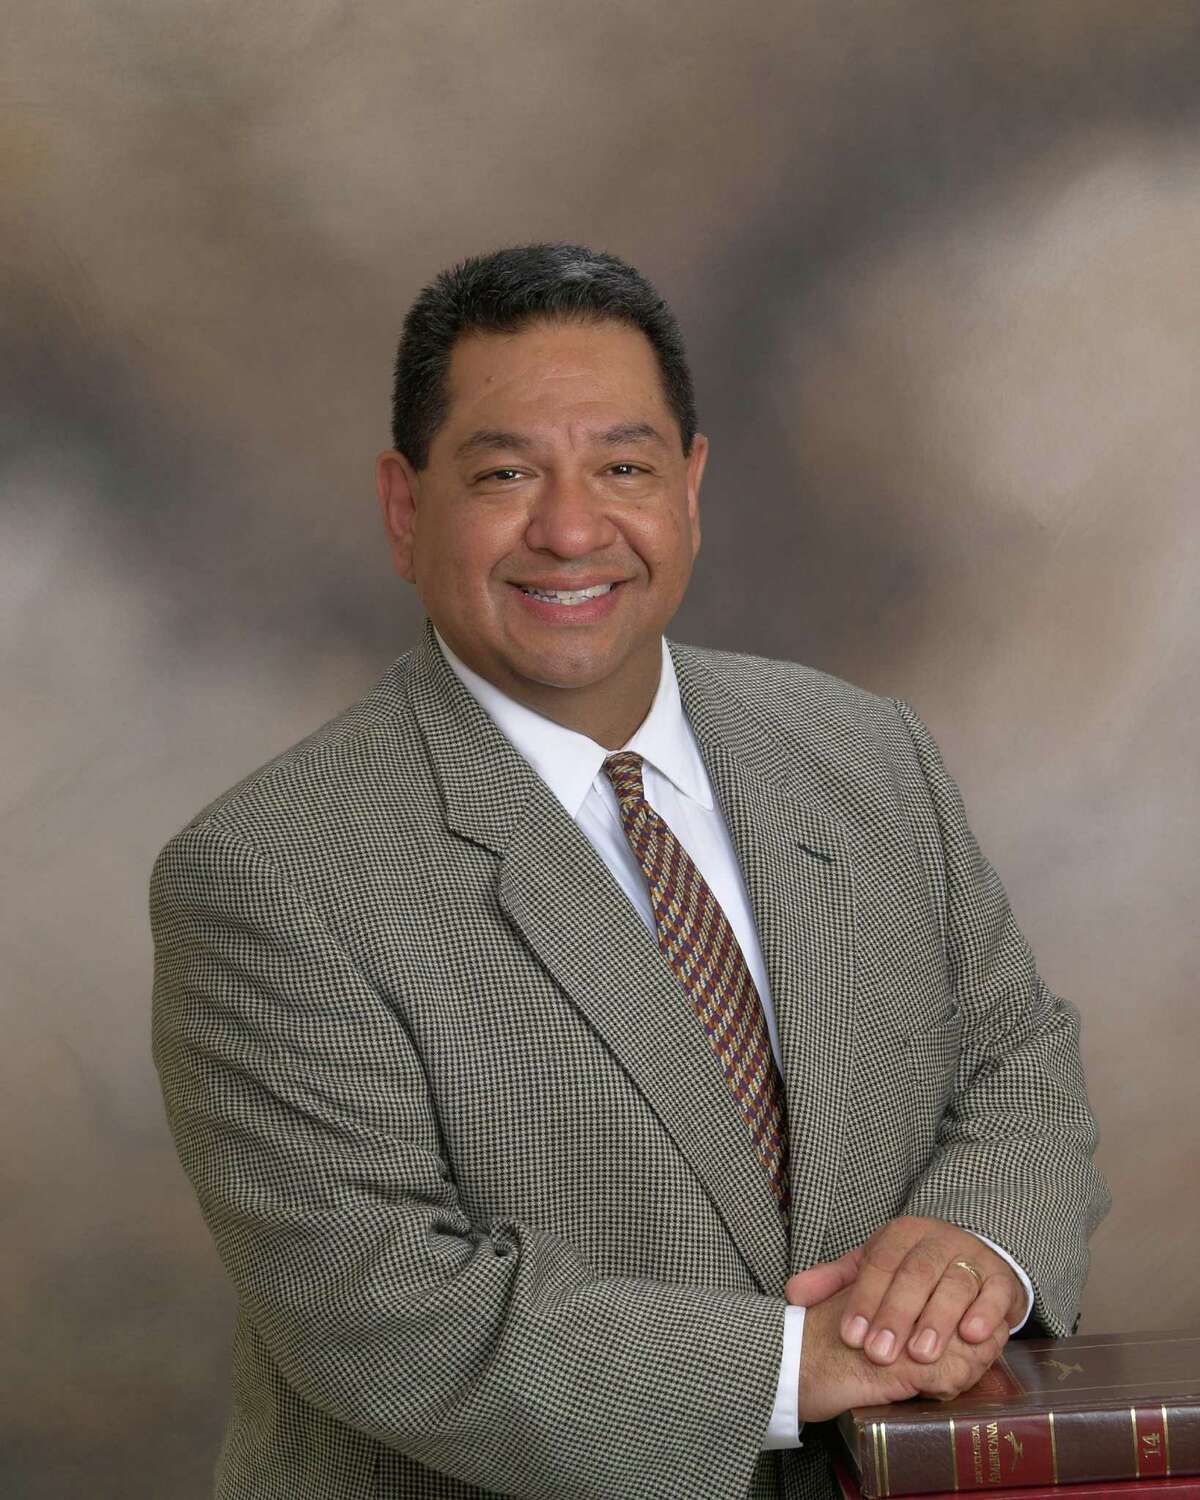 David L. Rosa, GOP candidate for U.S. House District 20. Courtesy